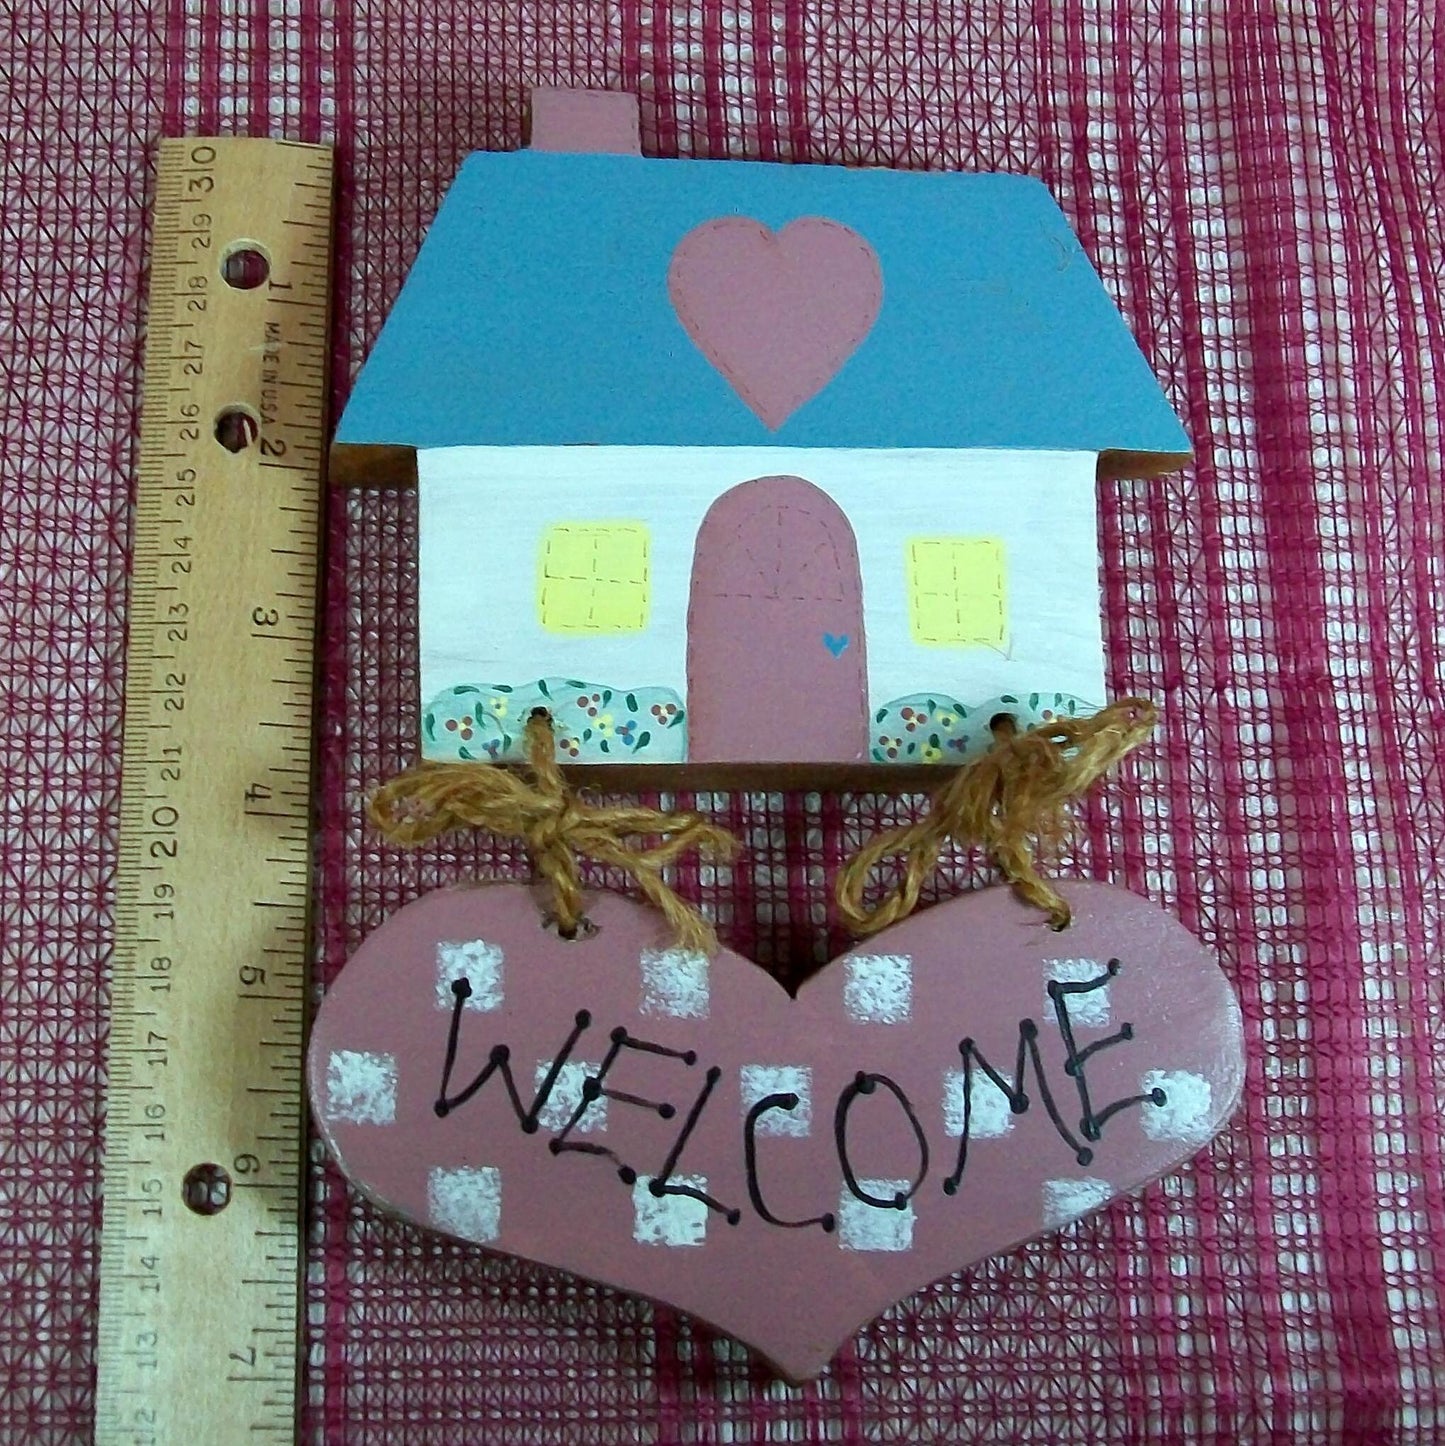 Handmade Rustic Wooden Welcome Sign / Wall Art Decor / Ready to Hang Hand Painted Wall Art / Wooden Wall Hanging /Housewarming Gift